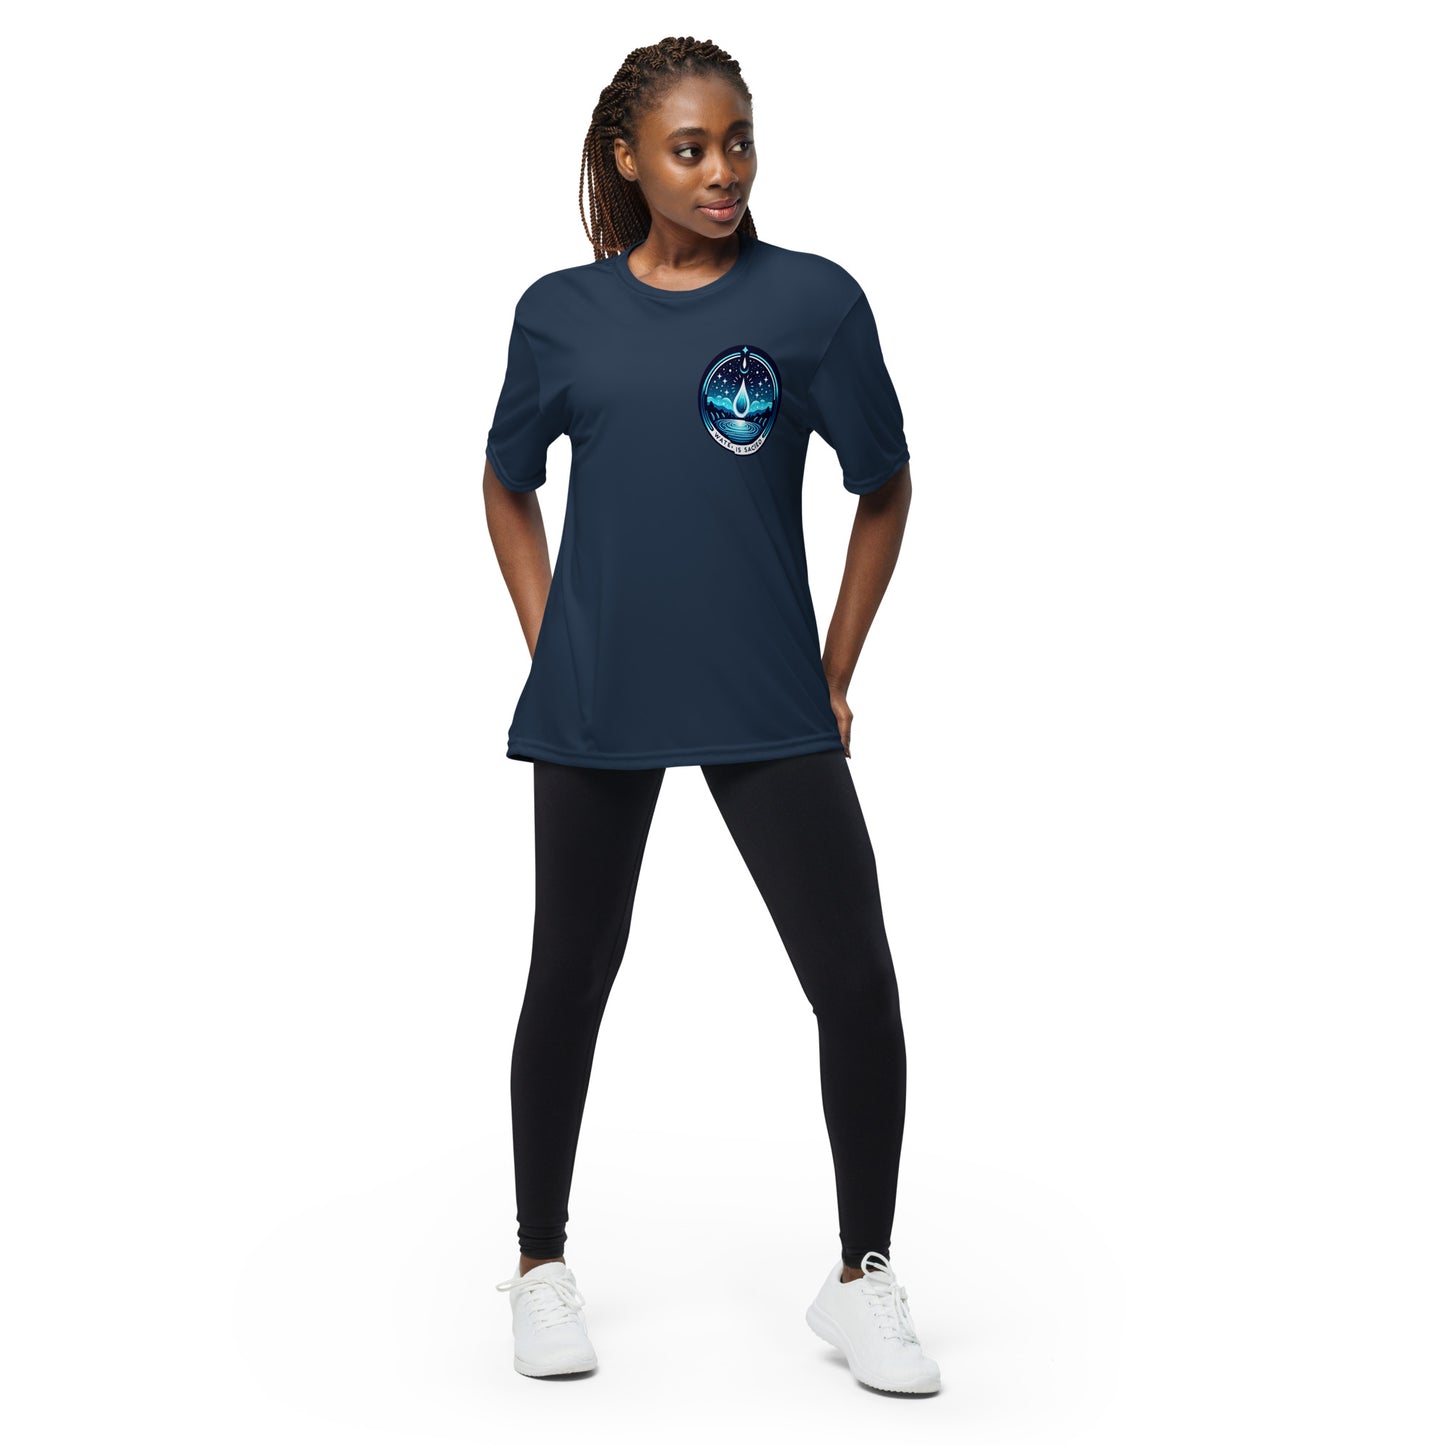 Water is Sacred- Unisex performance crew neck t-shirt